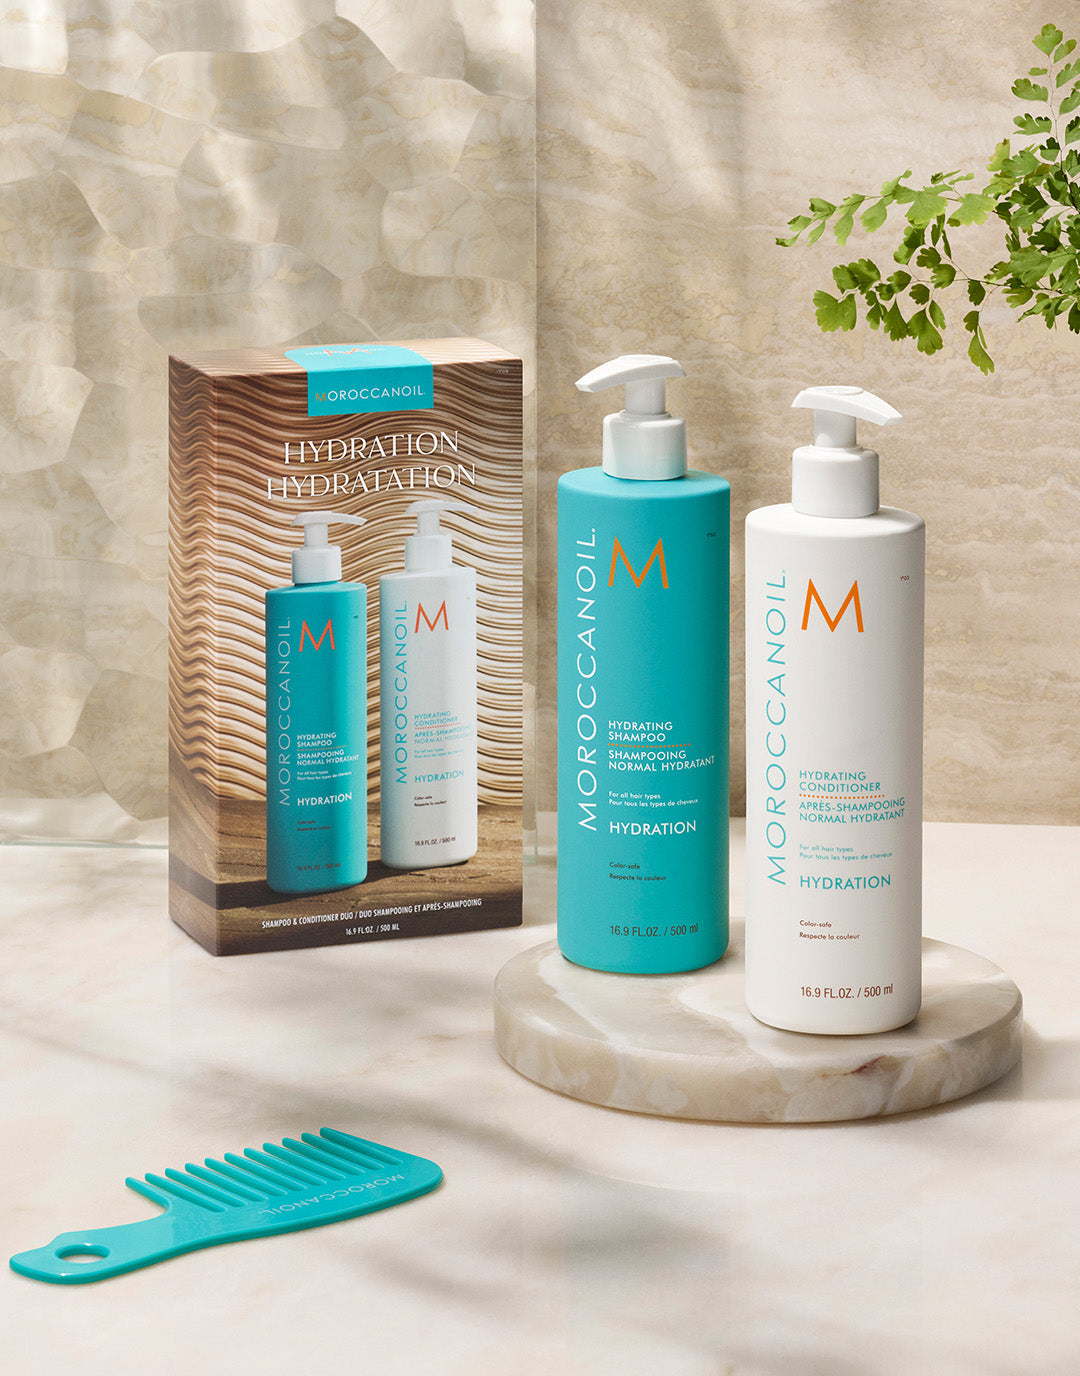 Moroccanoil Hydrating Shampoo and Conditioner Bundle